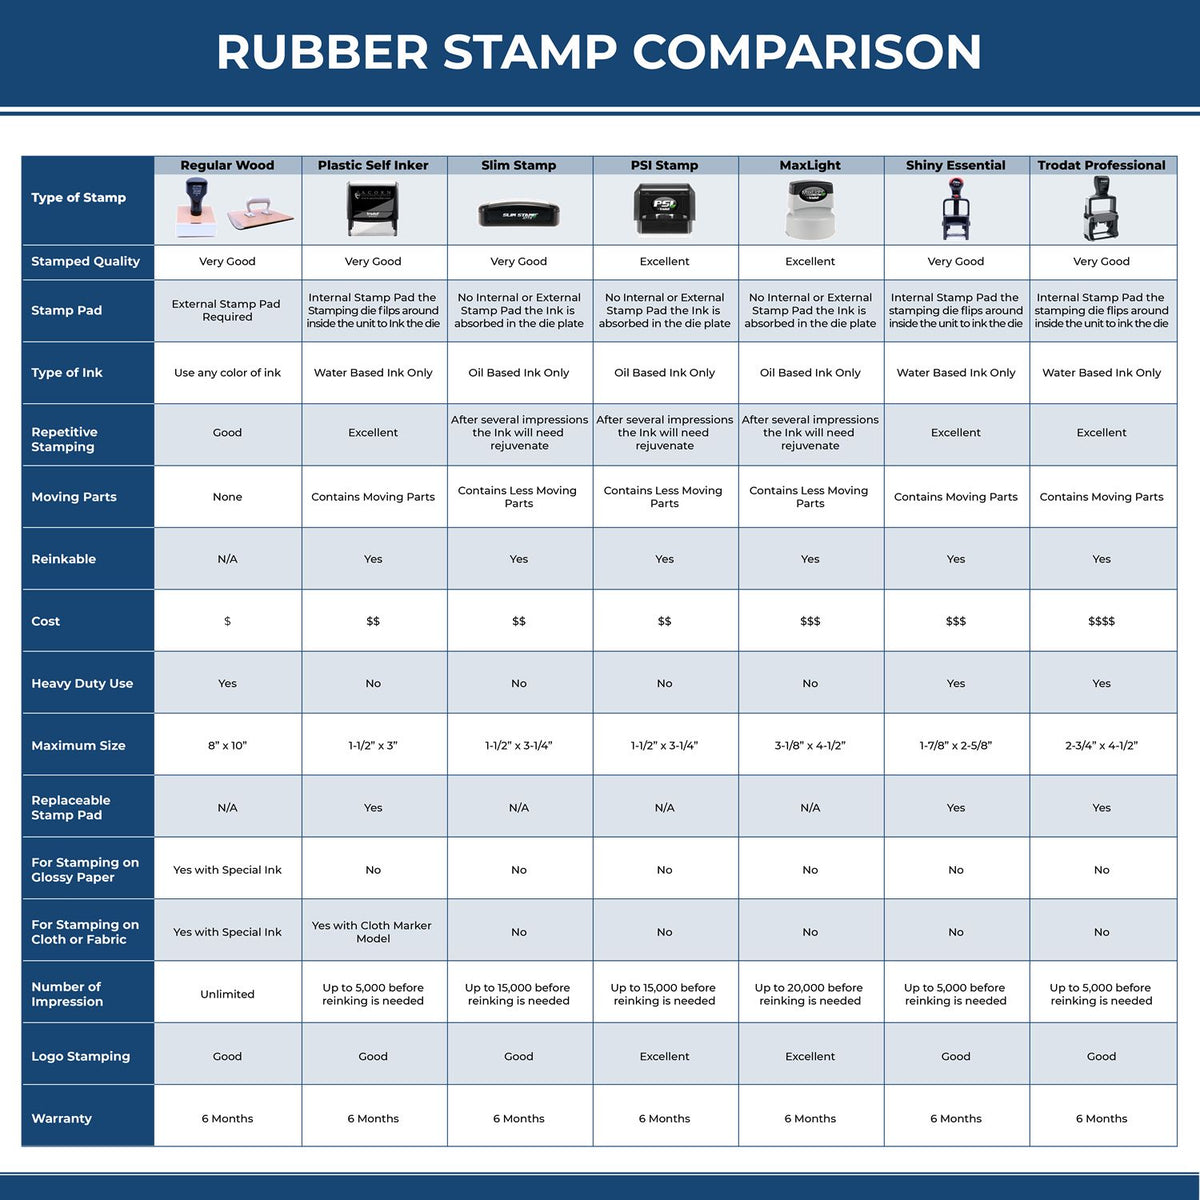 Large Community Property Rubber Stamp 4610R Rubber Stamp Comparison